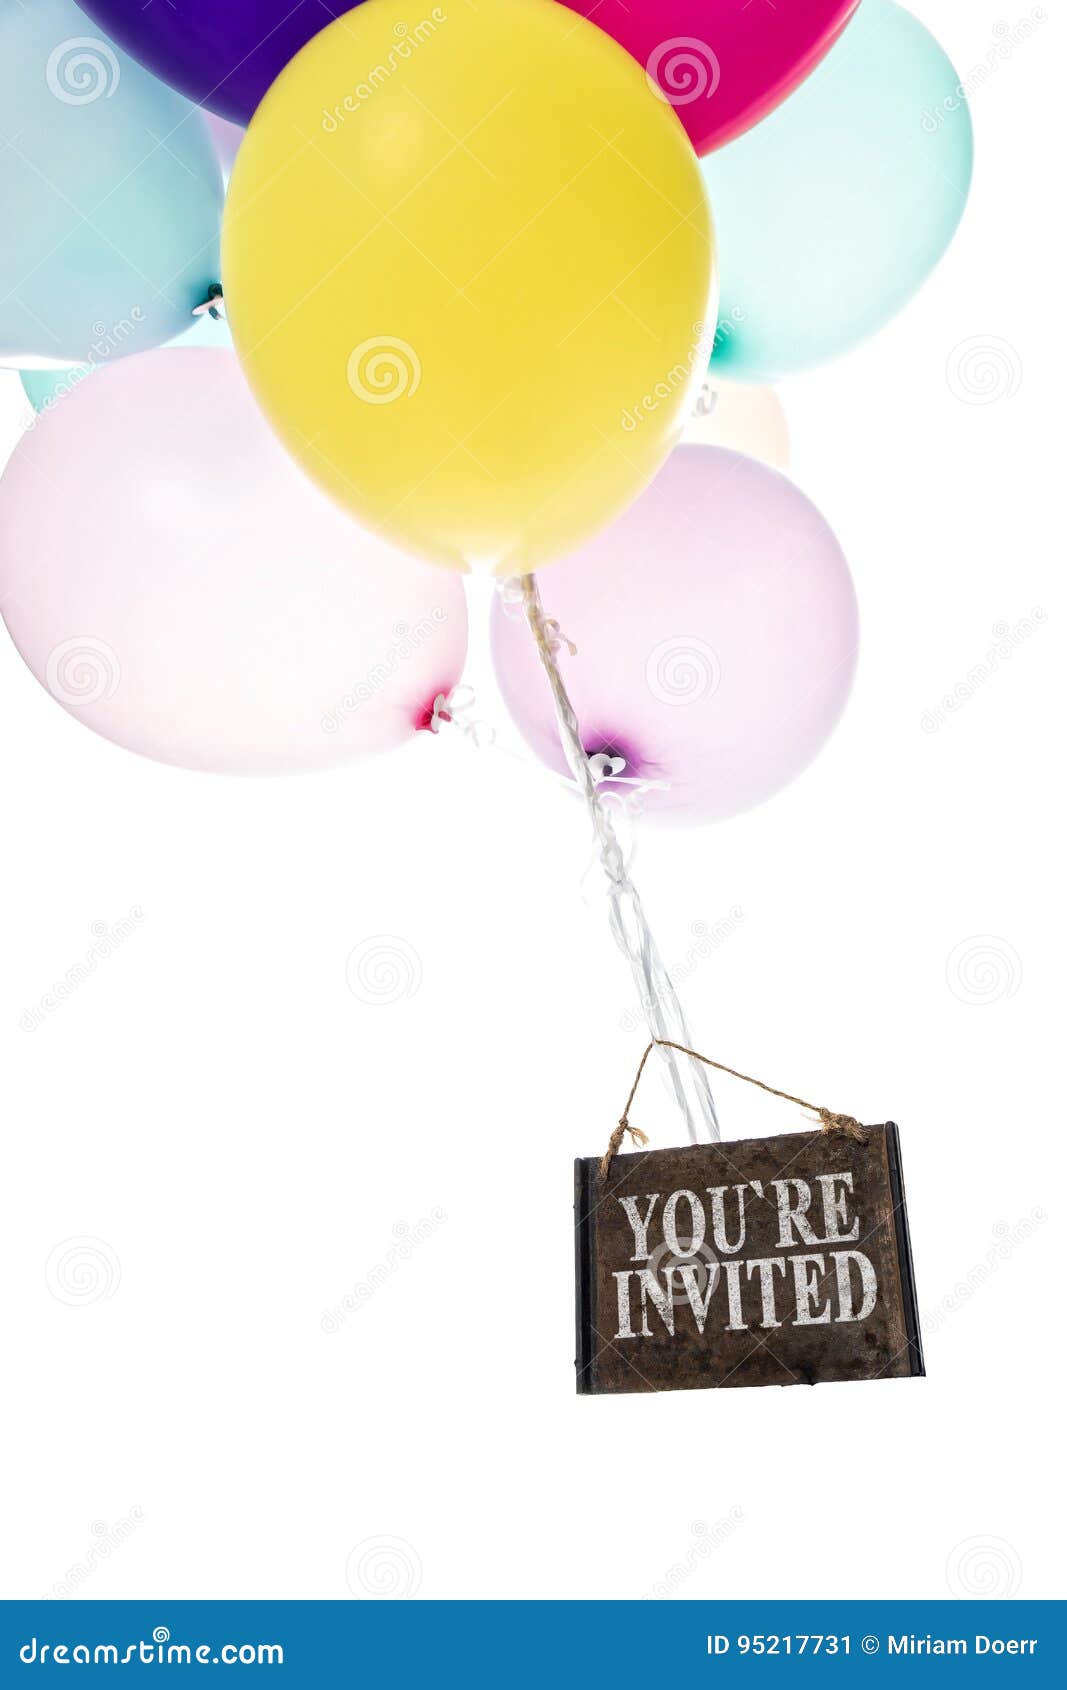 colorful ballons, slate with text youÃÂ´re invited